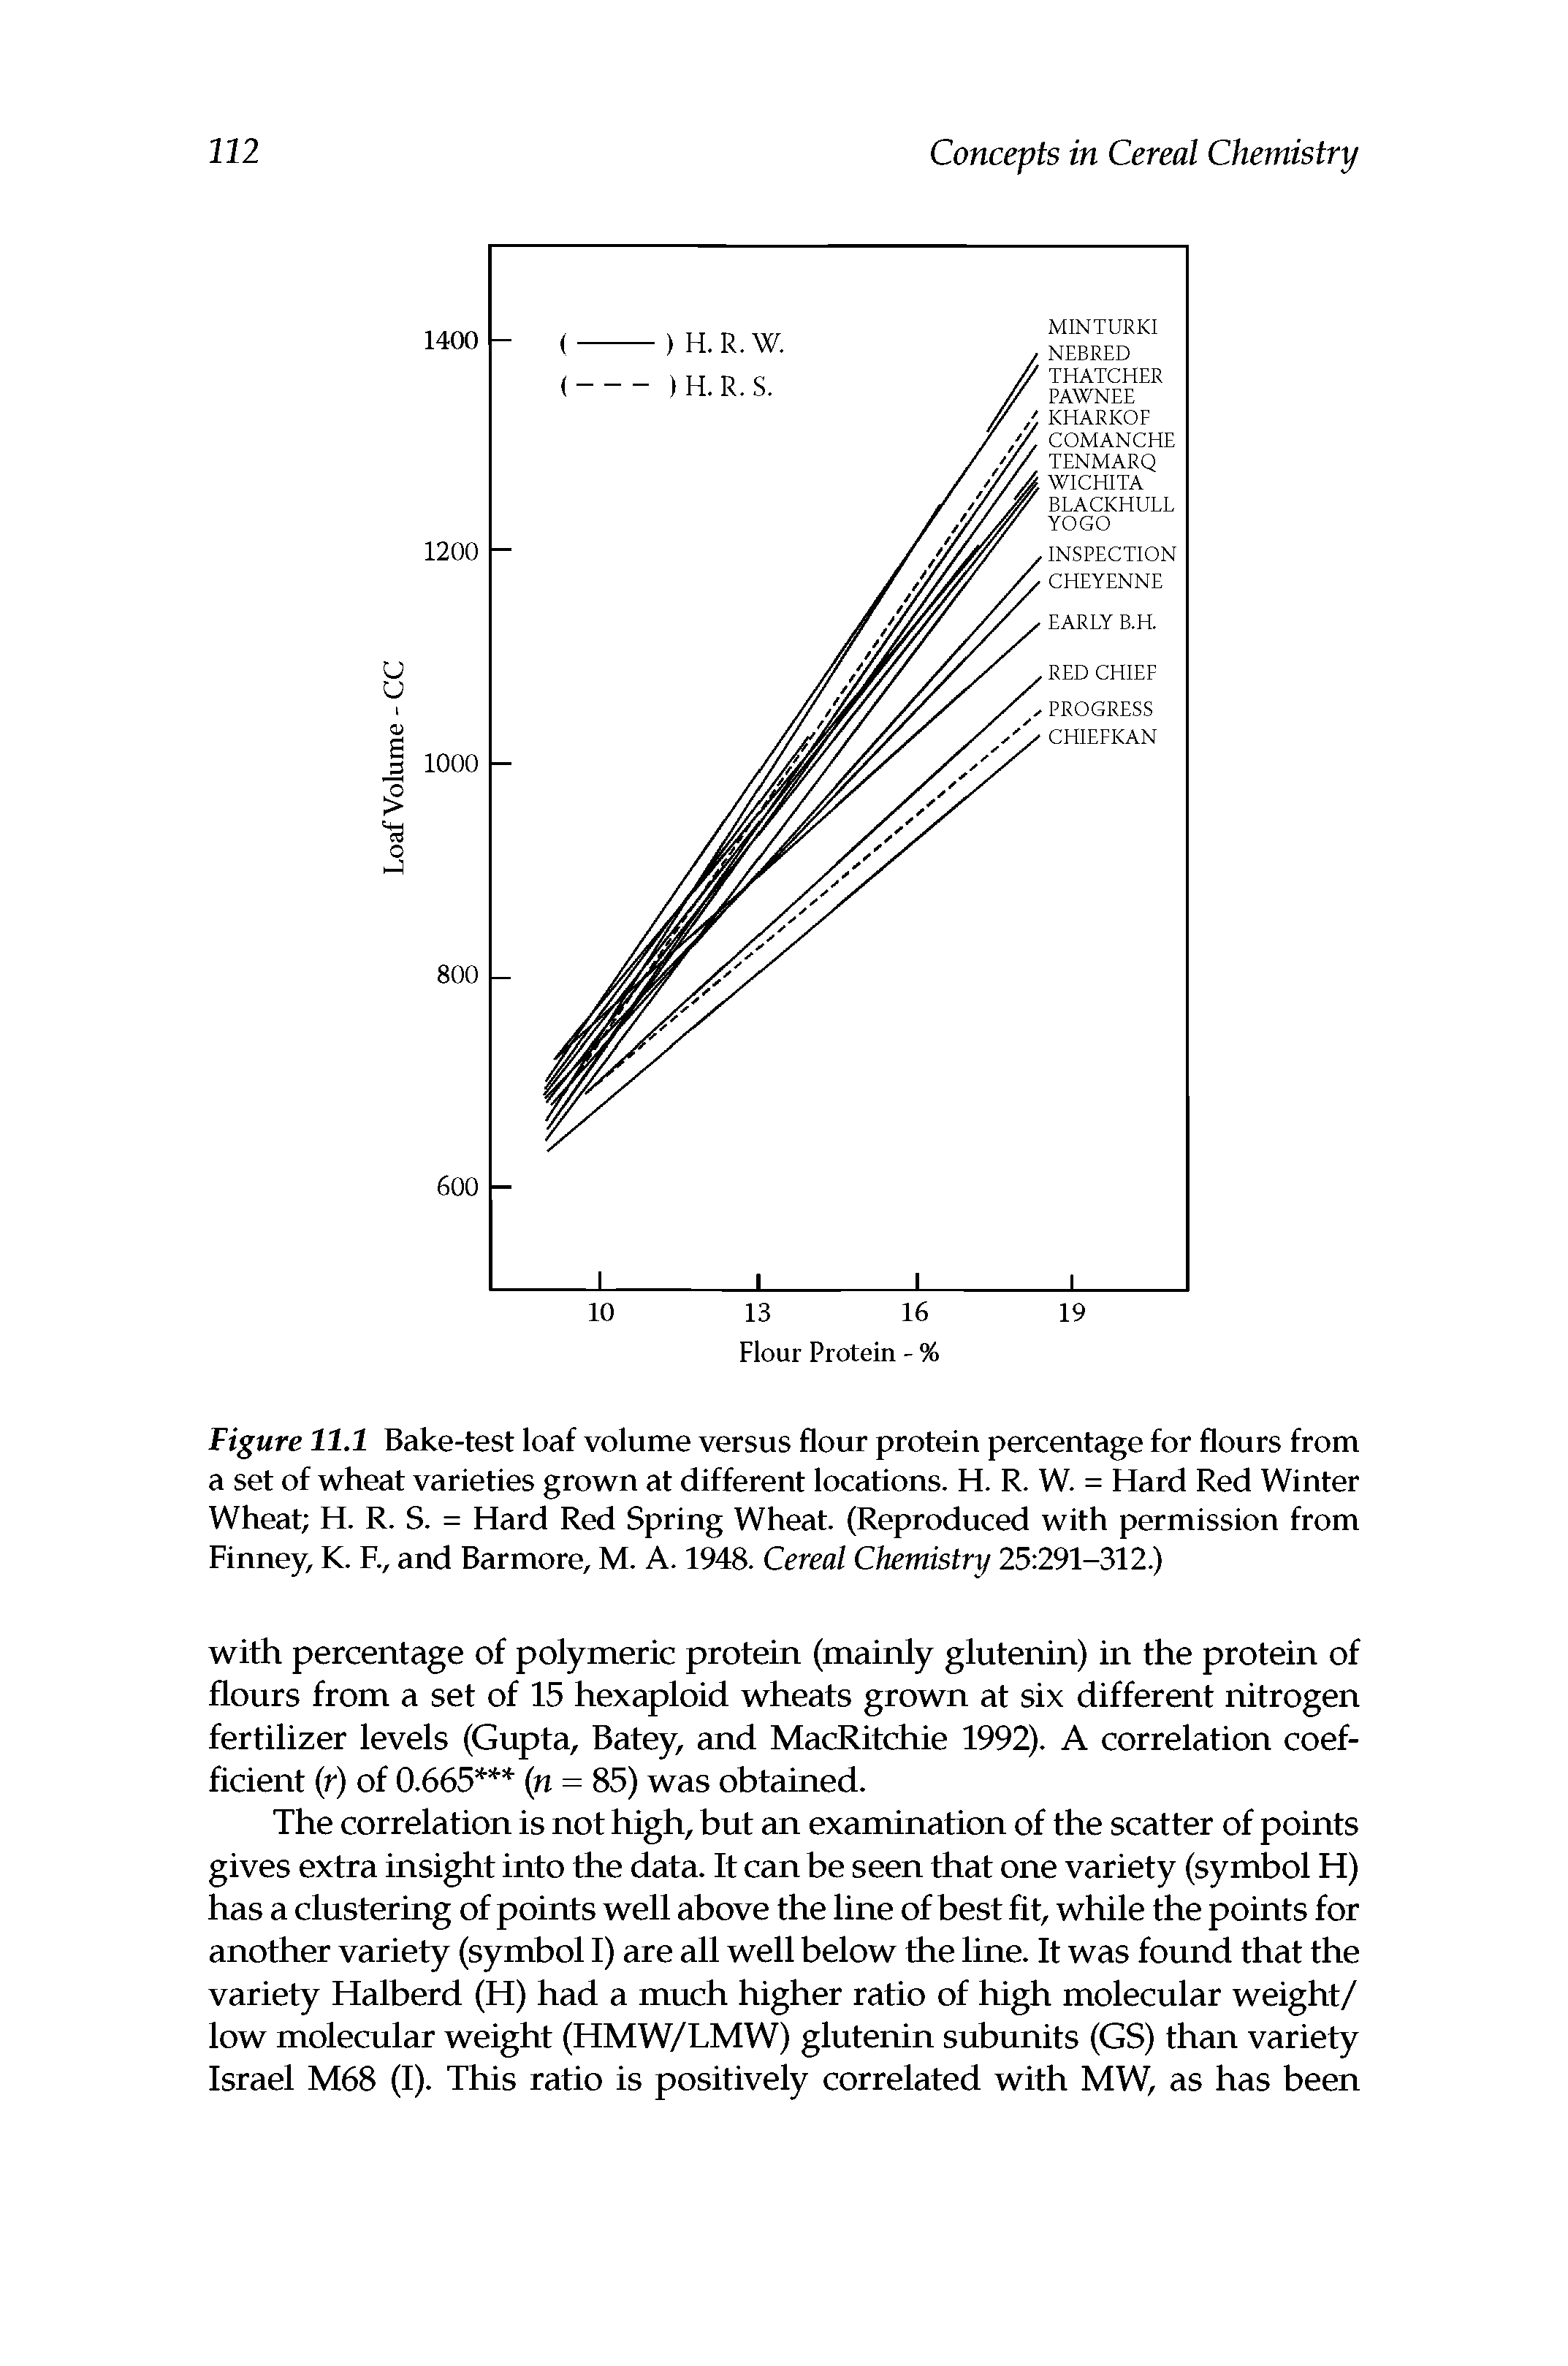 Figure 11.1 Bake-test loaf volume versus flour protein percentage for flours from a set of wheat varieties grown at different locations. H. R. W. = Hard Red Winter Wheat H. R. S. = Hard Red Spring Wheat. (Reproduced with permission from Finney, K. R, and Barmore, M. A. 1948. Cereal Chemistry 25 291-312.)...